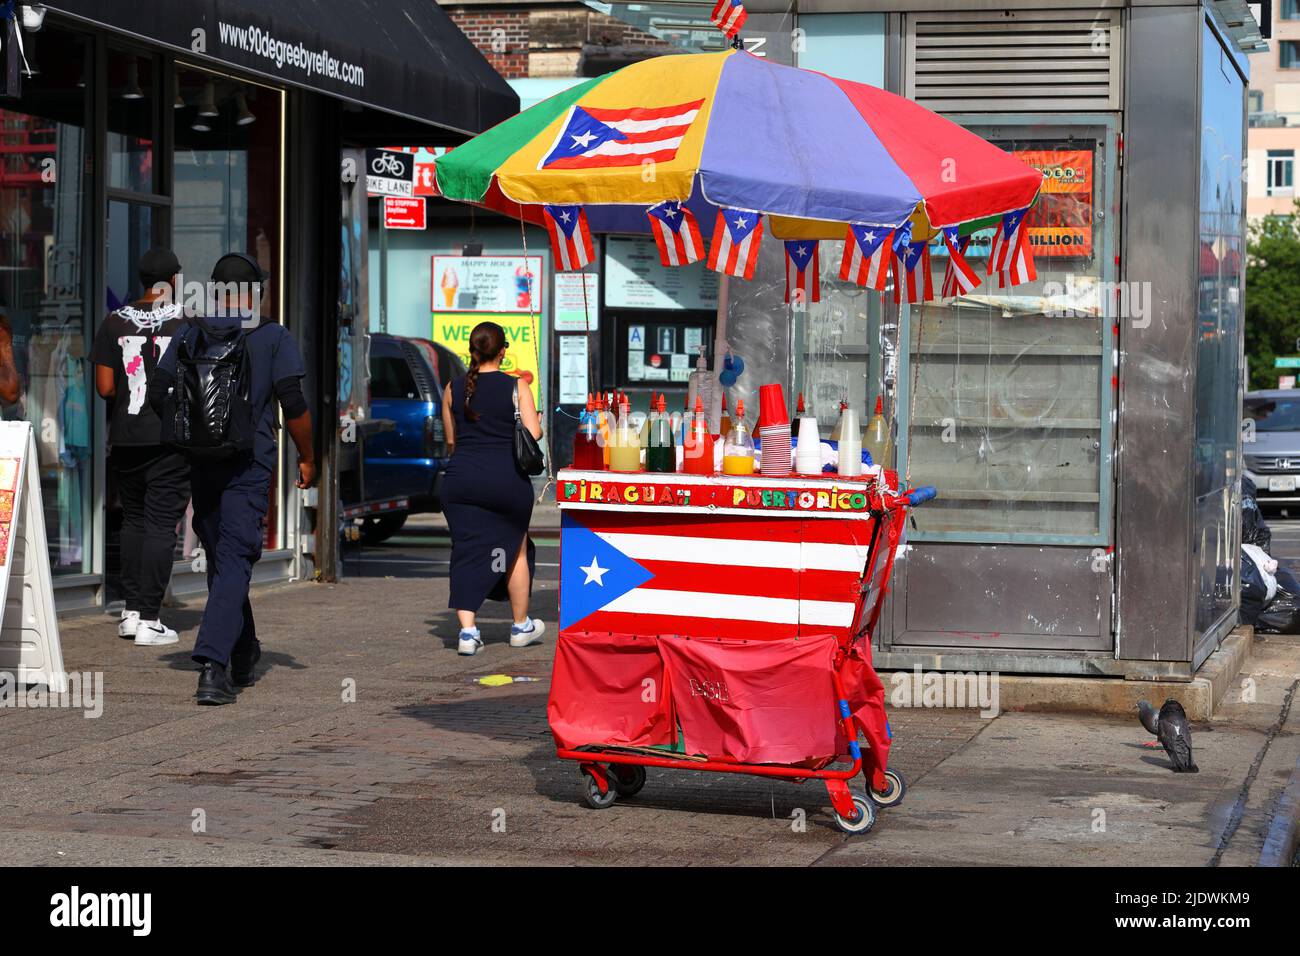 A colorful piragua shaved ice pushcart adorned with flags of Puerto Rico in Manhattan's Lower East Side in New York. Stock Photo